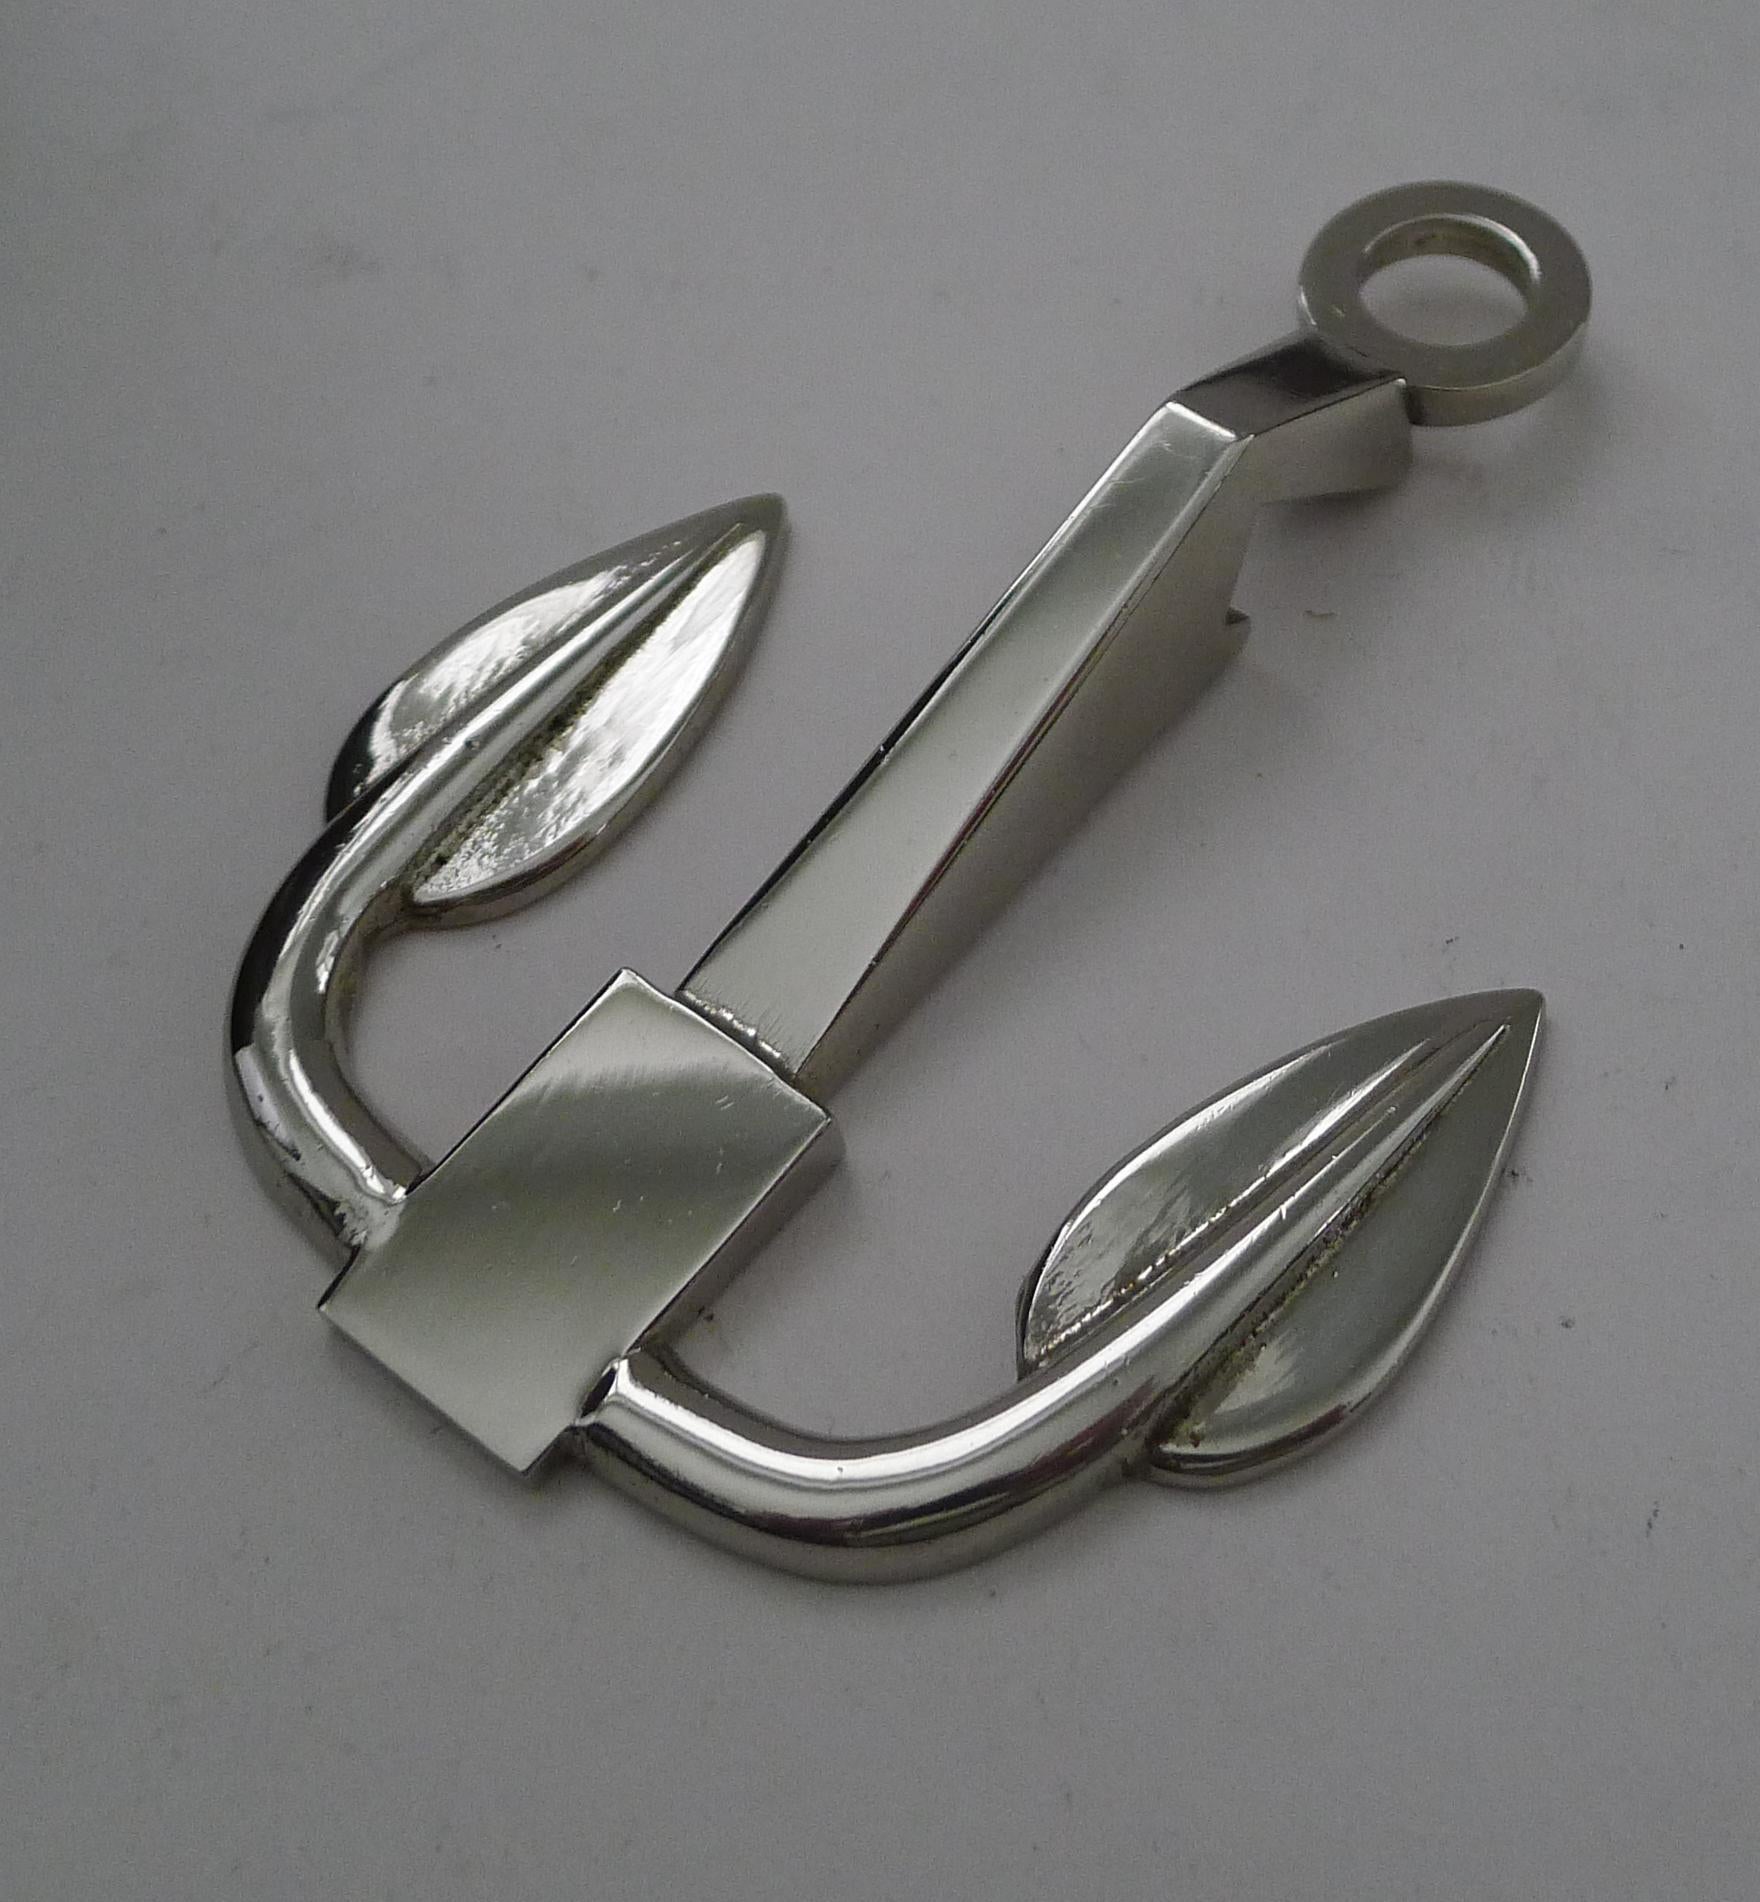 Gucci, Italy - Nautical Anchor Bottle Opener c.1970/1980 For Sale 1